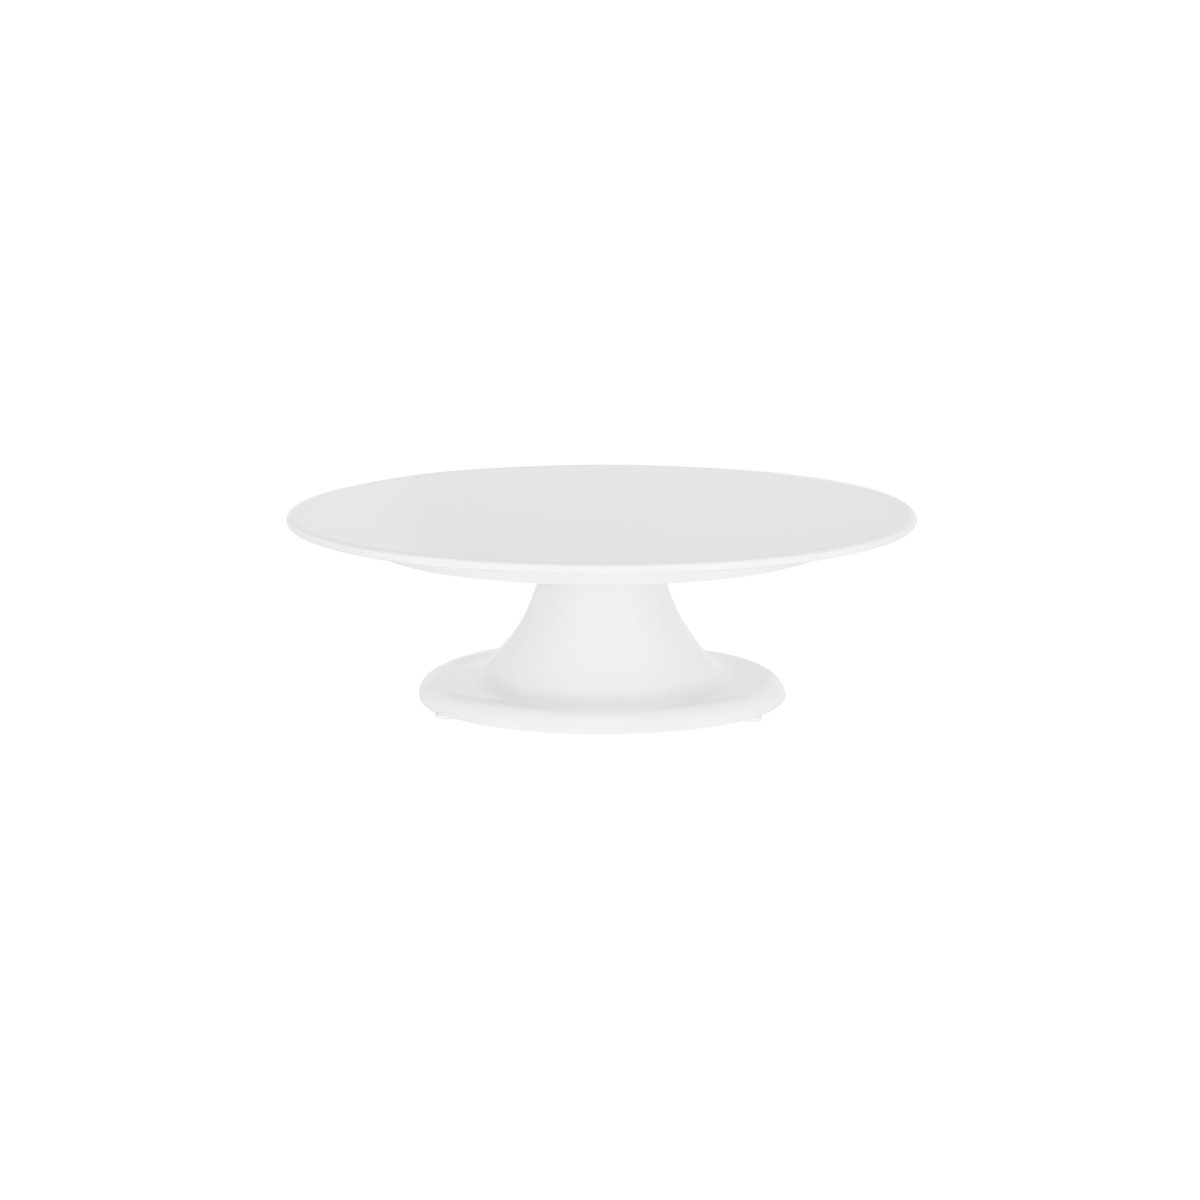 31001 Thermohauser Cake Stand Relvolving 320x100mm Tomkin Australia Hospitality Supplies